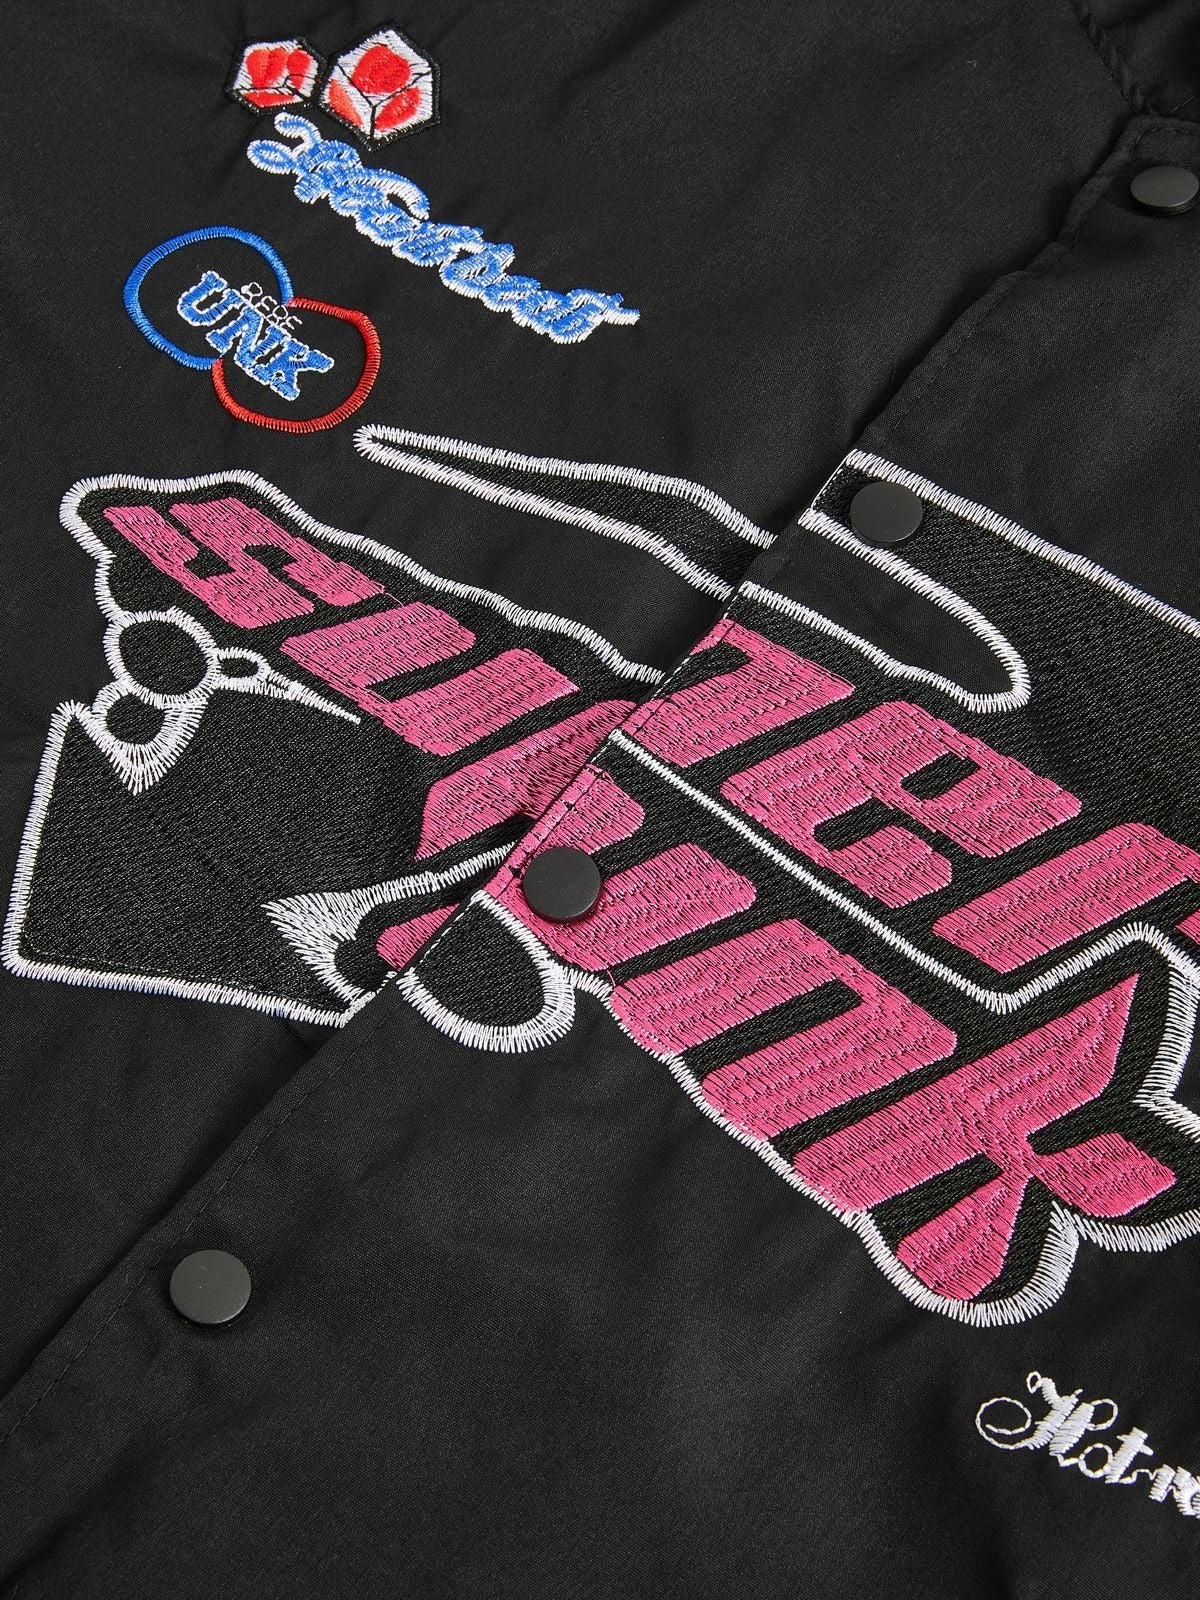 Black vintage motorcycle bomber jacket with embroidery